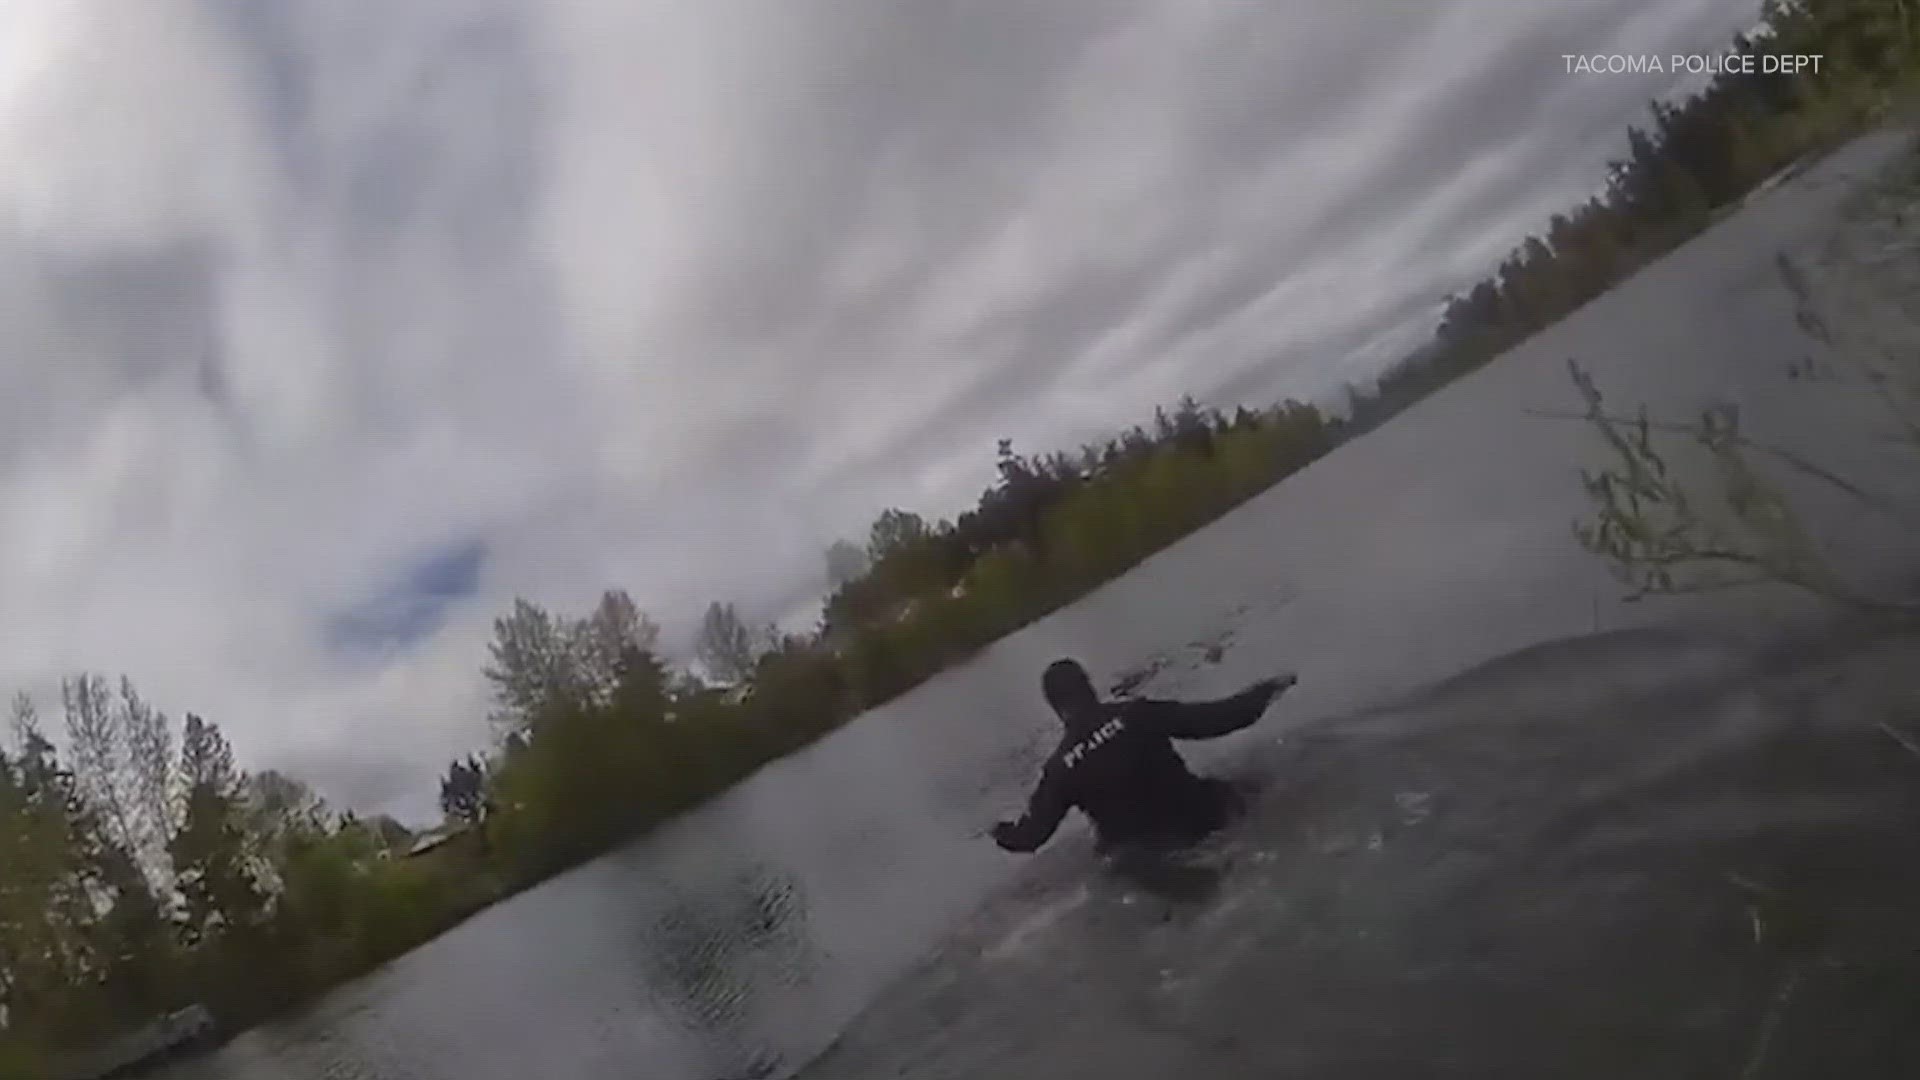 Dramatic body camera video shows Tacoma police save drowning girl ...